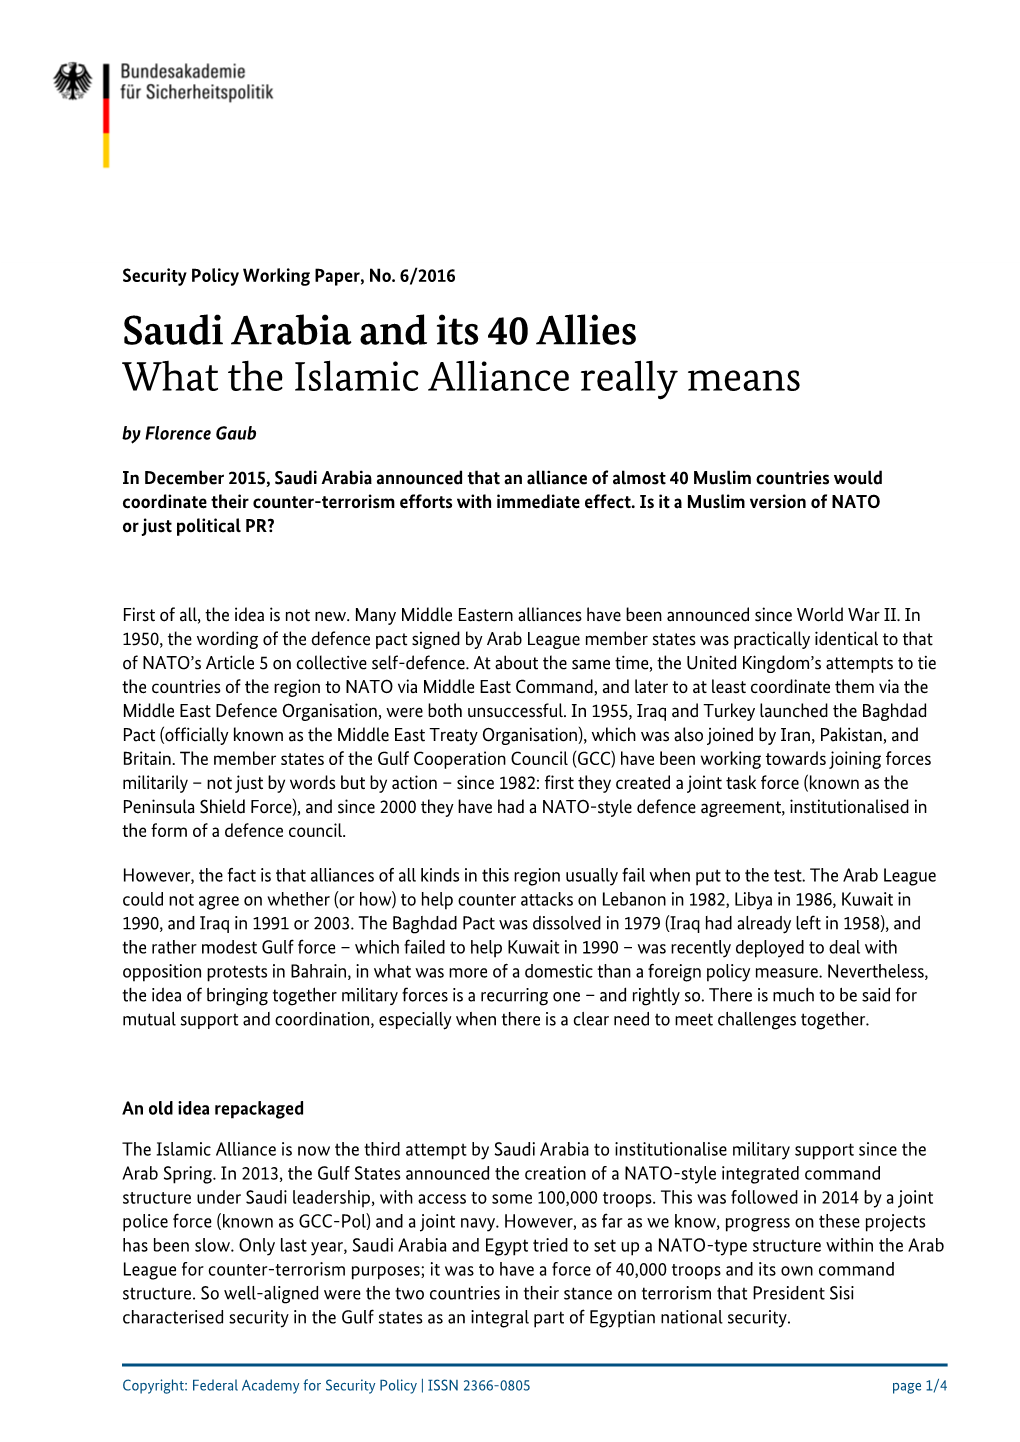 Saudi Arabia and Its 40 Allies What the Islamic Alliance Really Means by Florence Gaub